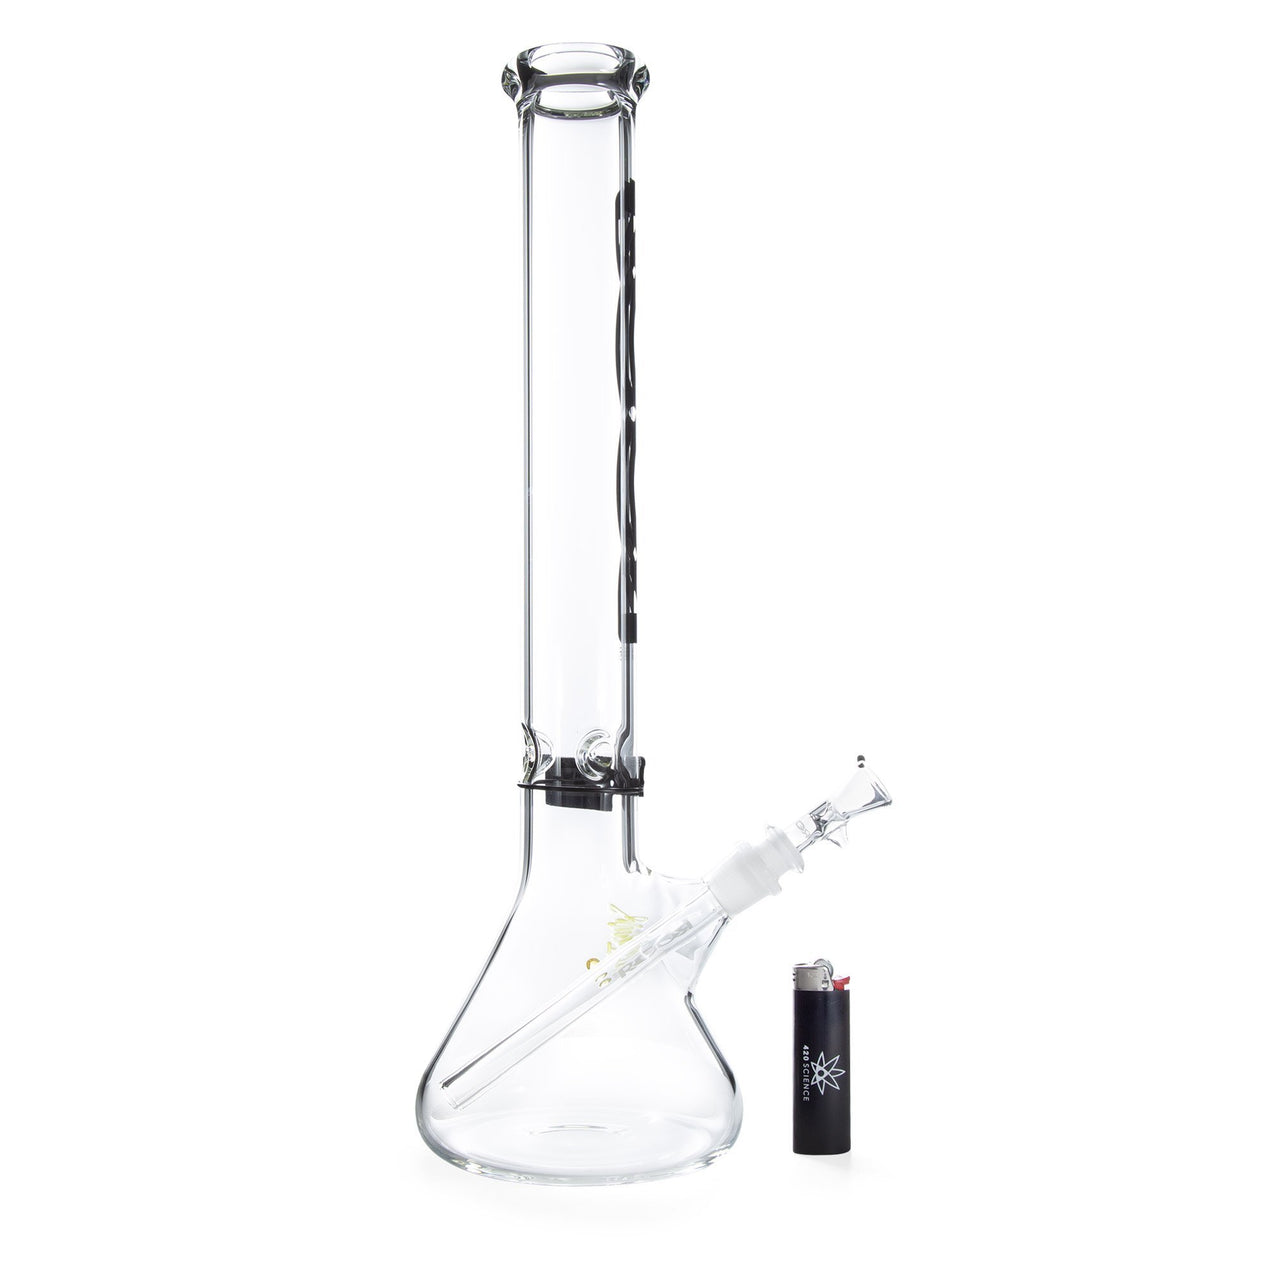 ROOR 18in Beaker 50x5mm - 420 Science - The most trusted online smoke shop.